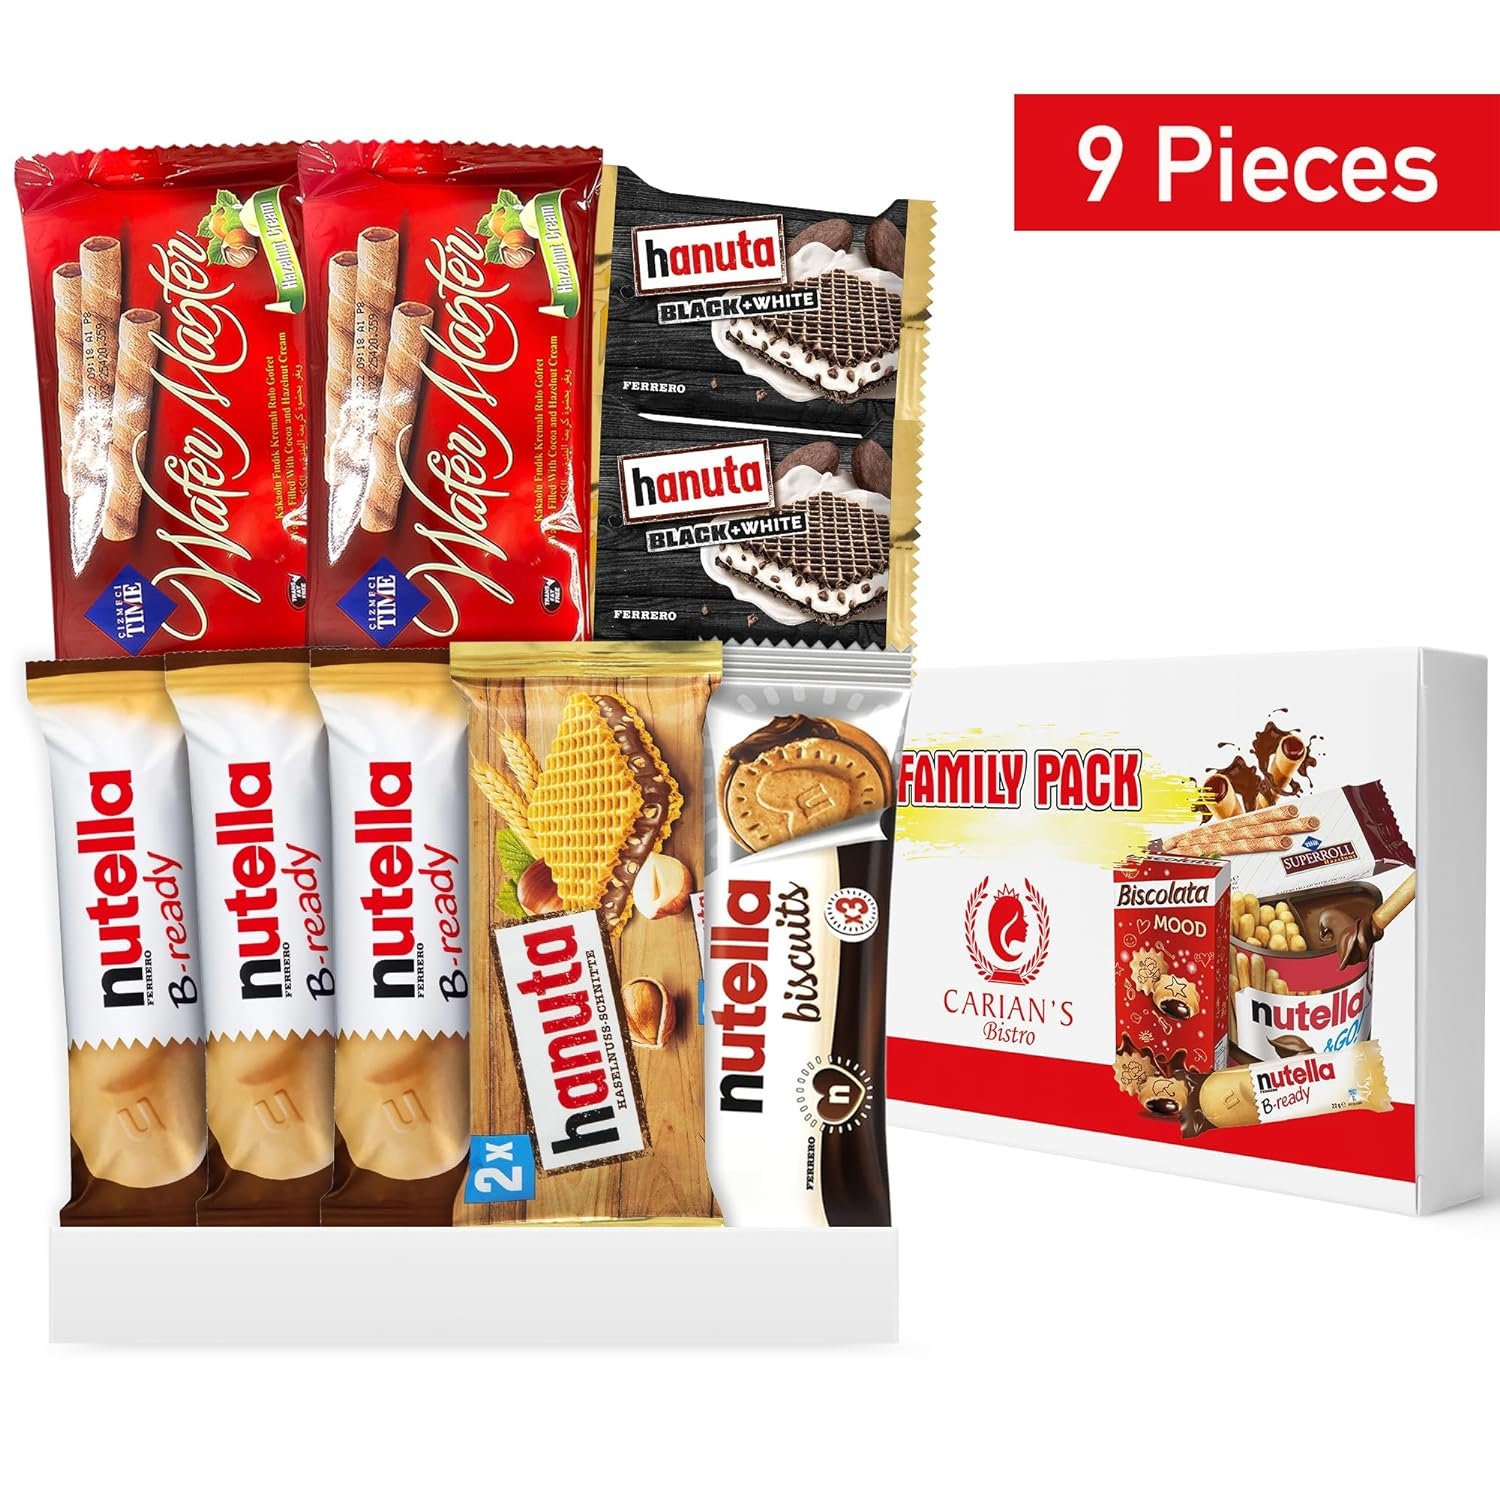 for and Nutella Snack,24pcs Pack,b-ready,biscuits,hanuta,roll Snack Etsy - Adults,9 Size Kids Snacks Wafers,perfect Full